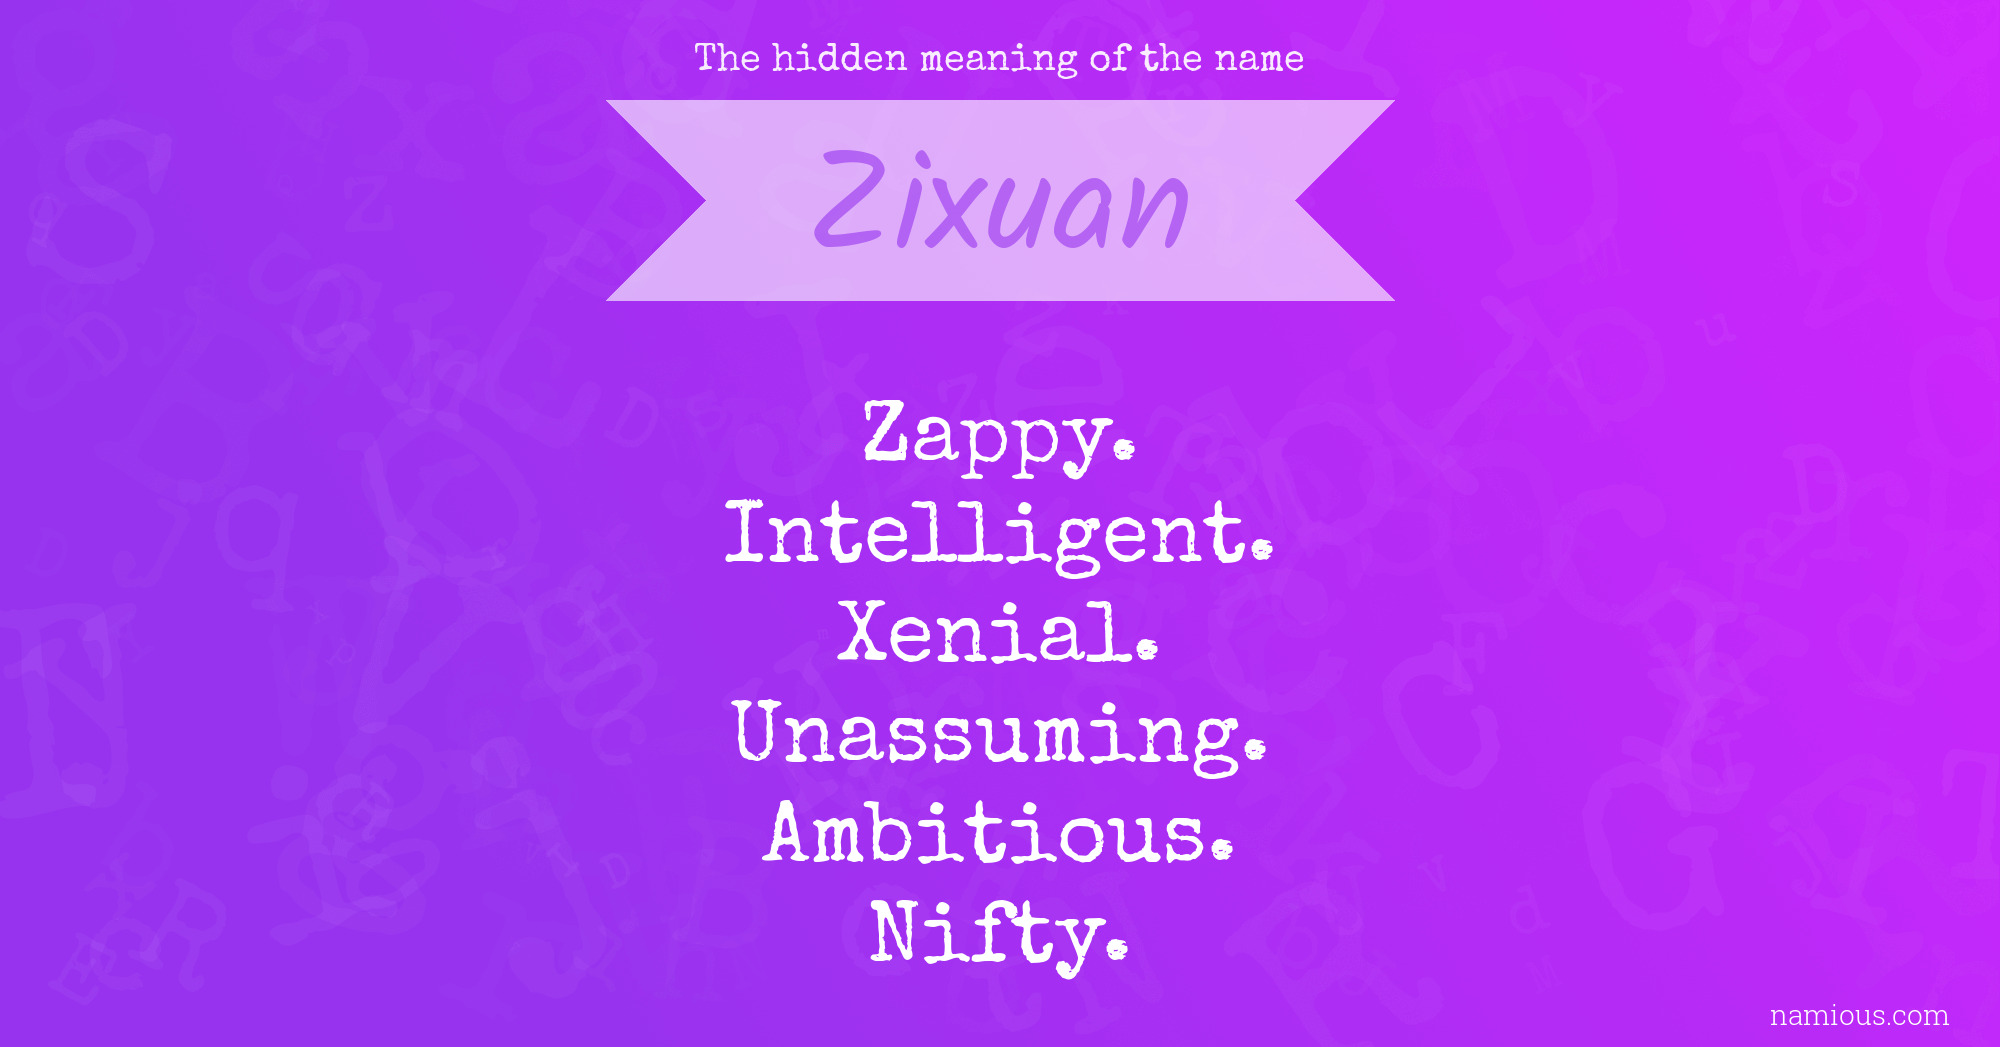 The hidden meaning of the name Zixuan